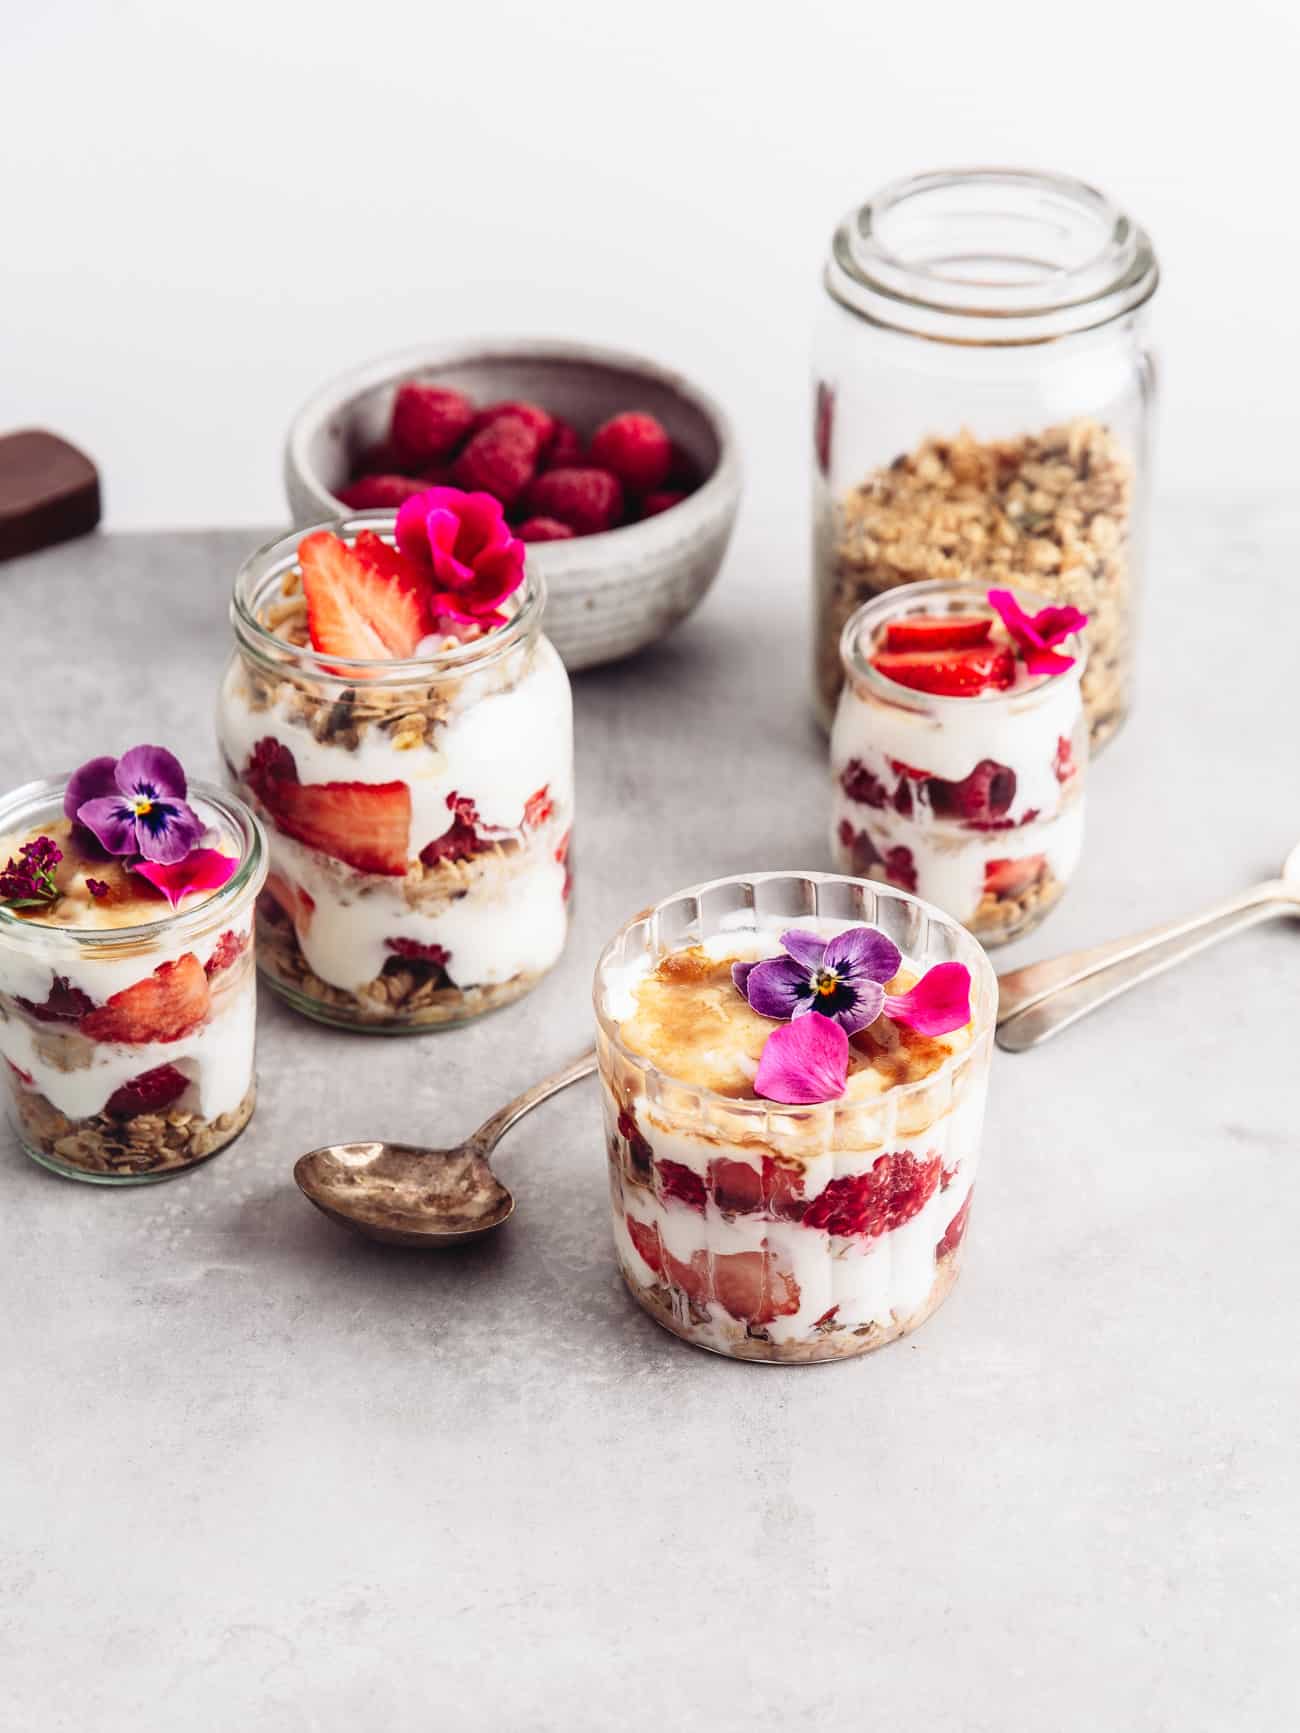 Three jars of layered yoghurt with brulee tops, fruit and granola